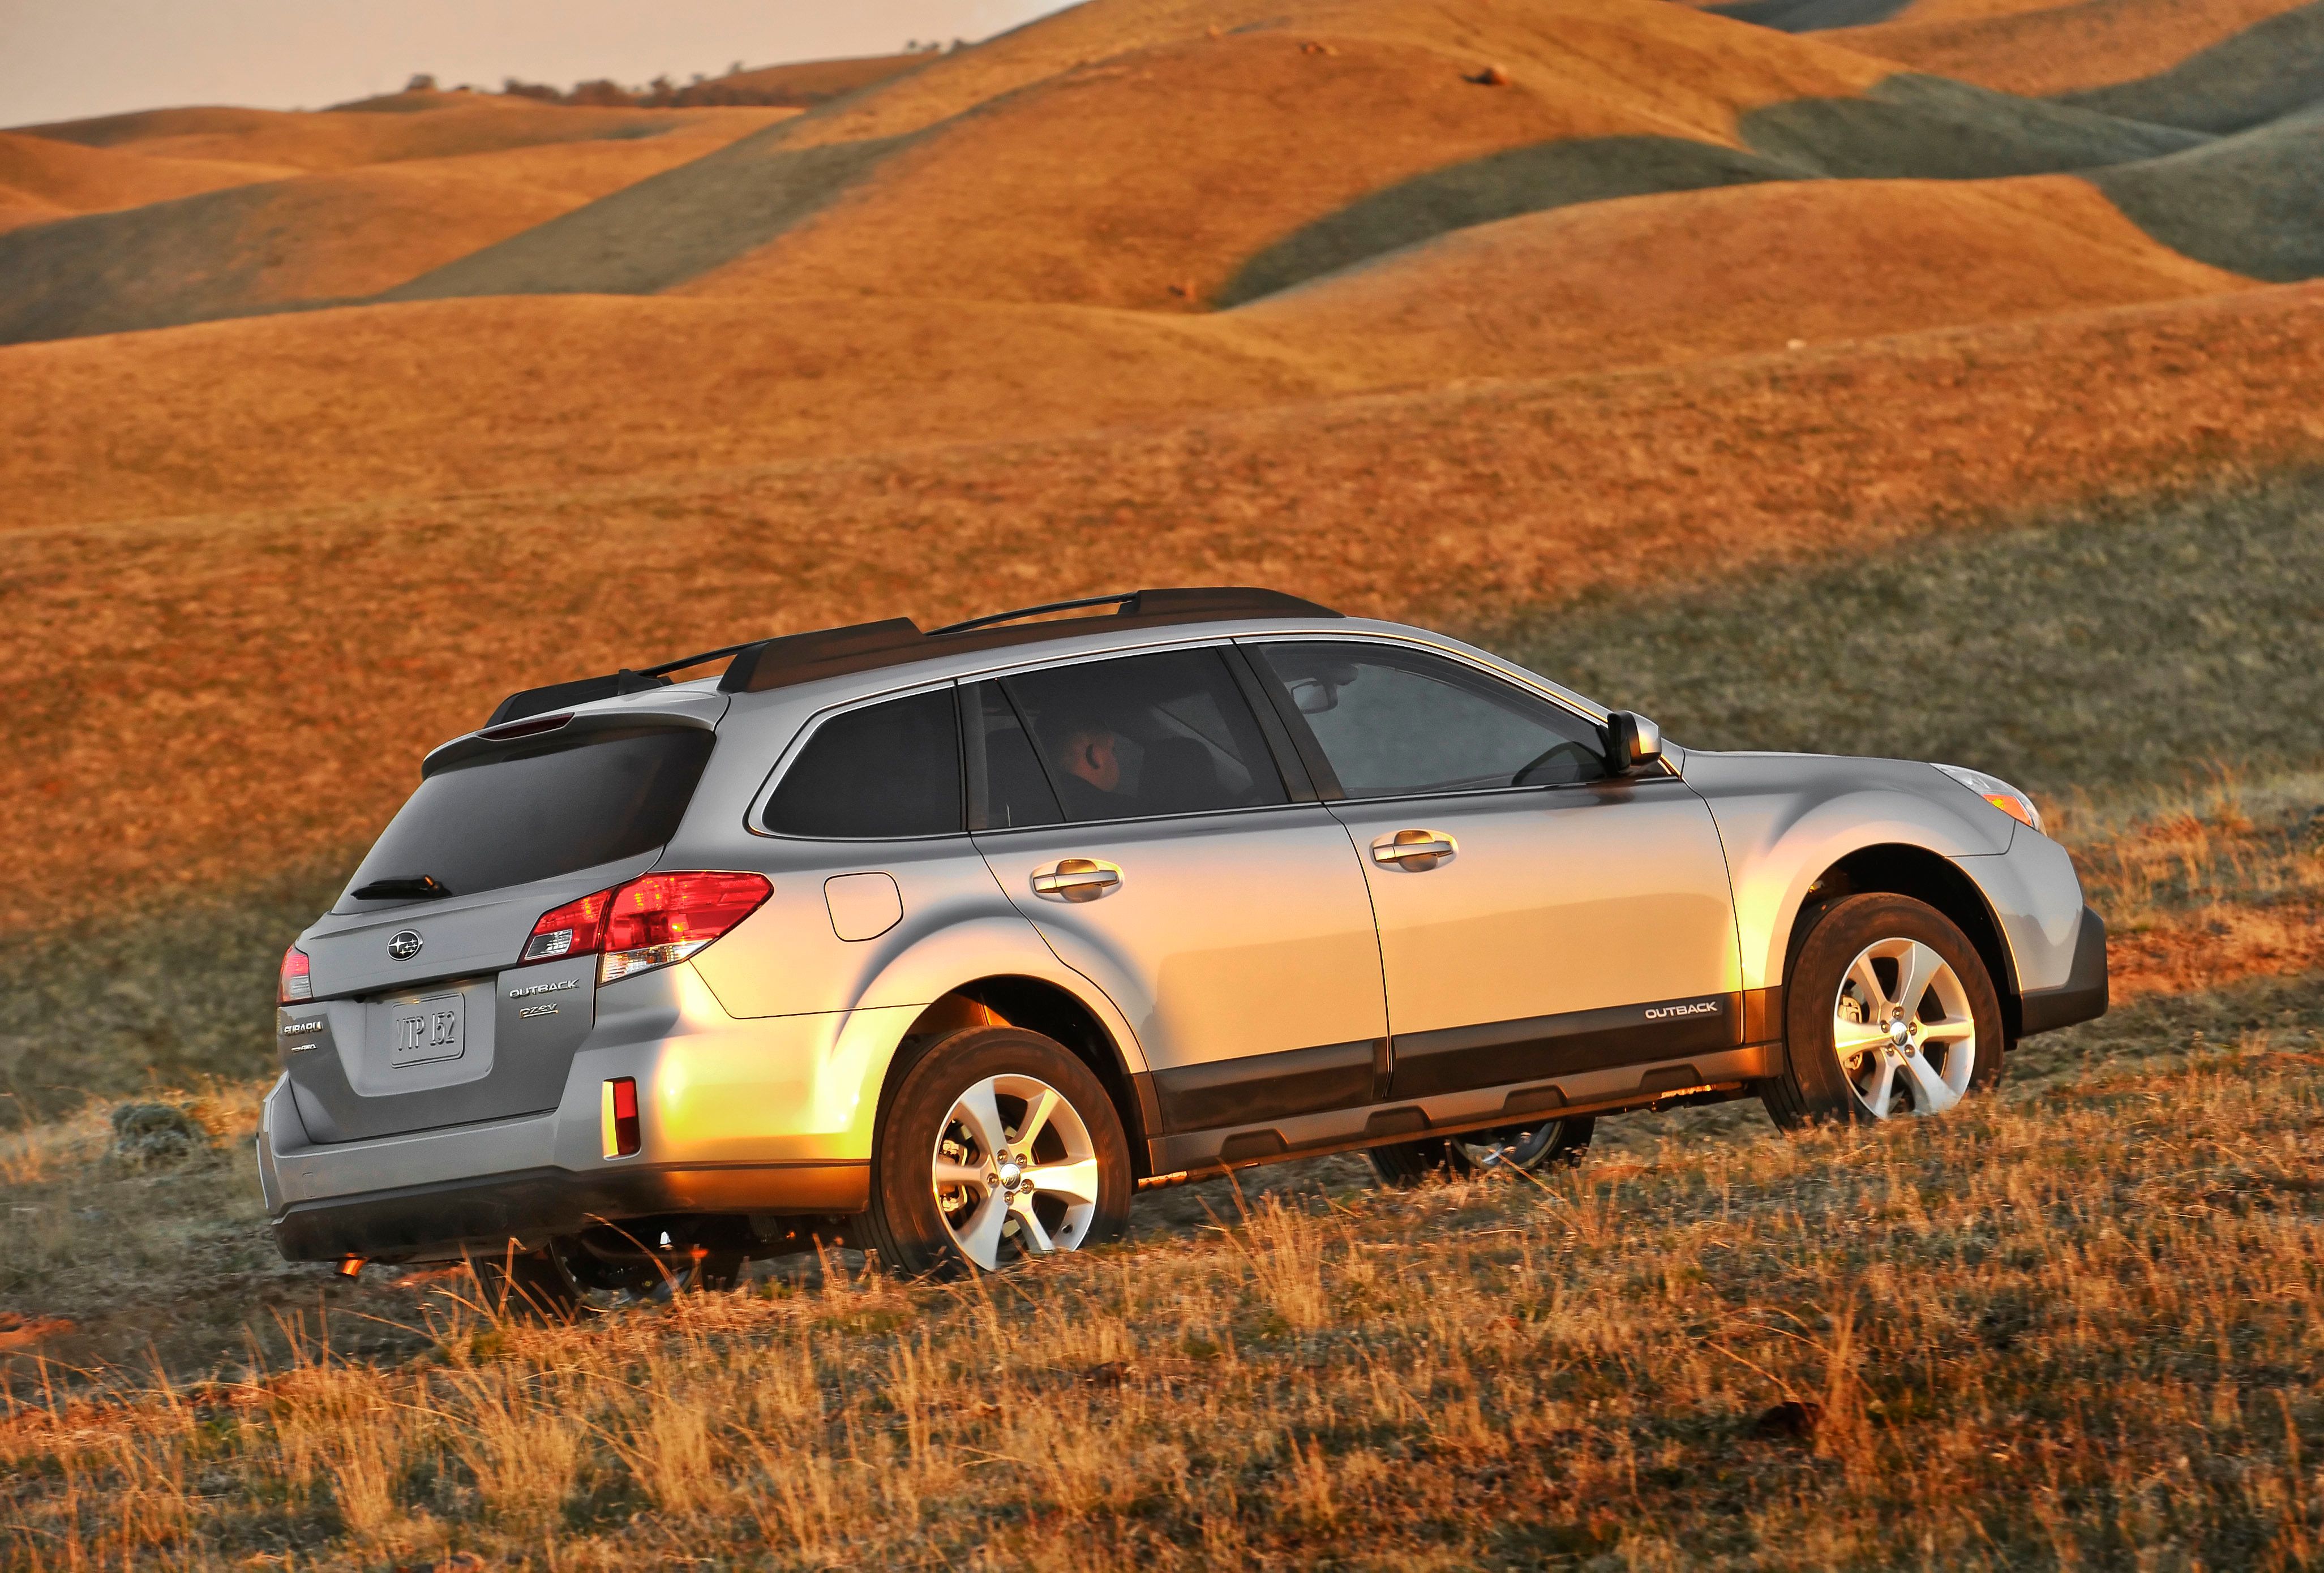 A 2013 Subaru Outback in the open plains